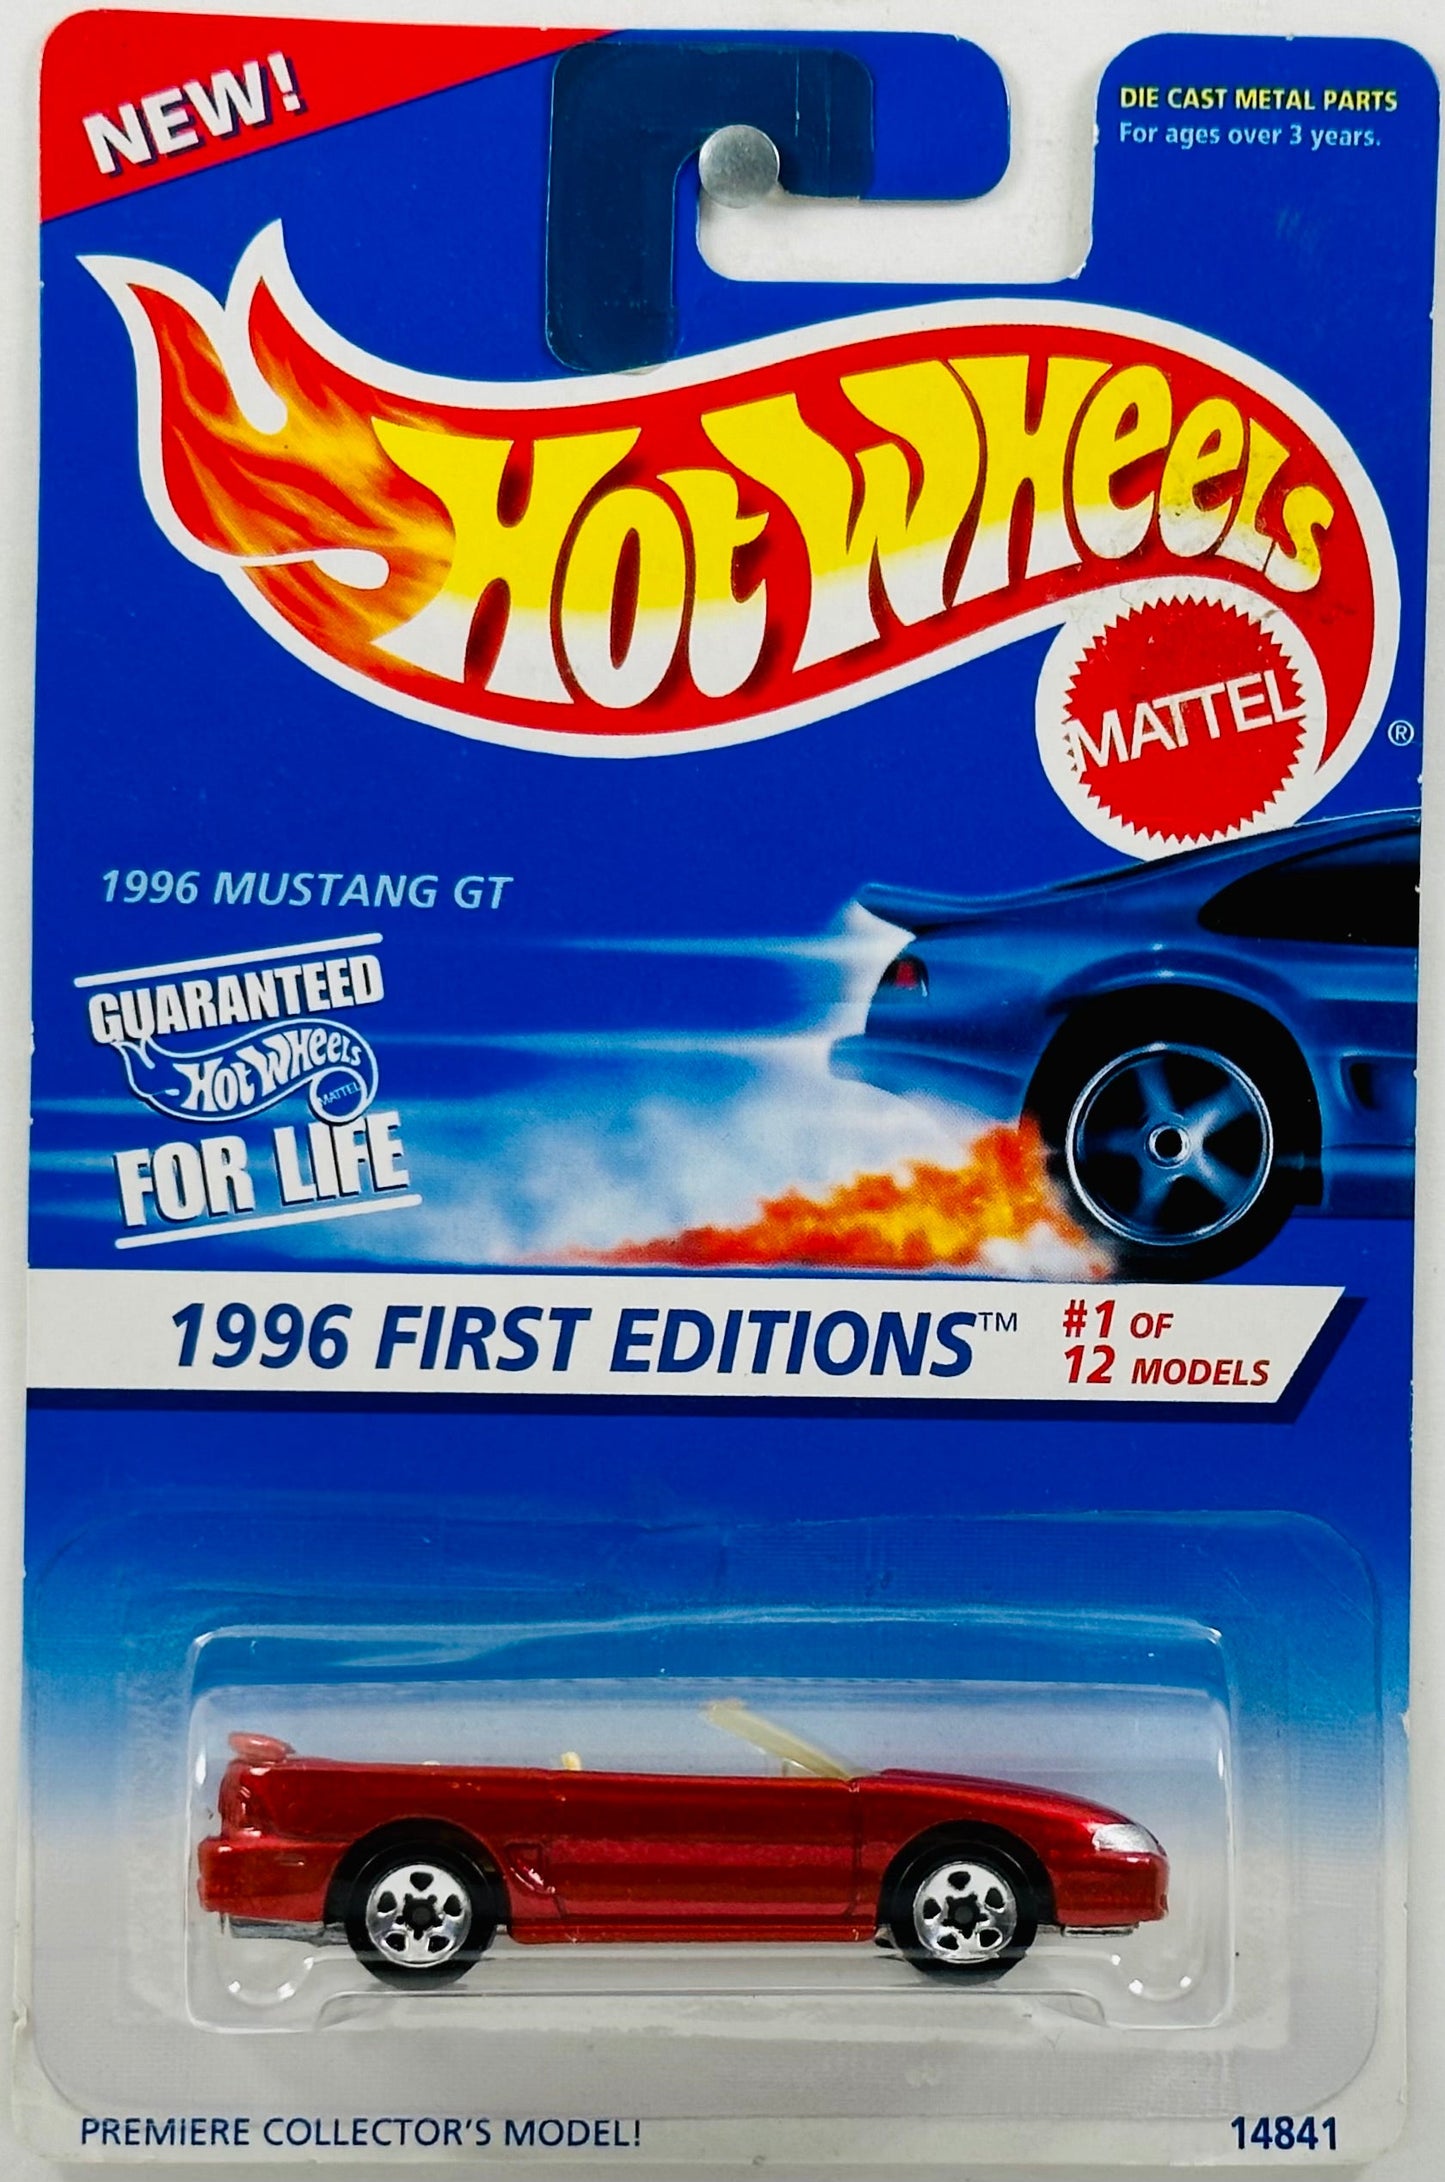 Hot Wheels 1996 - Collector # 378 - First Editions 1/12 - 1996 Mustang GT - Red - 5 Spokes - New / USA